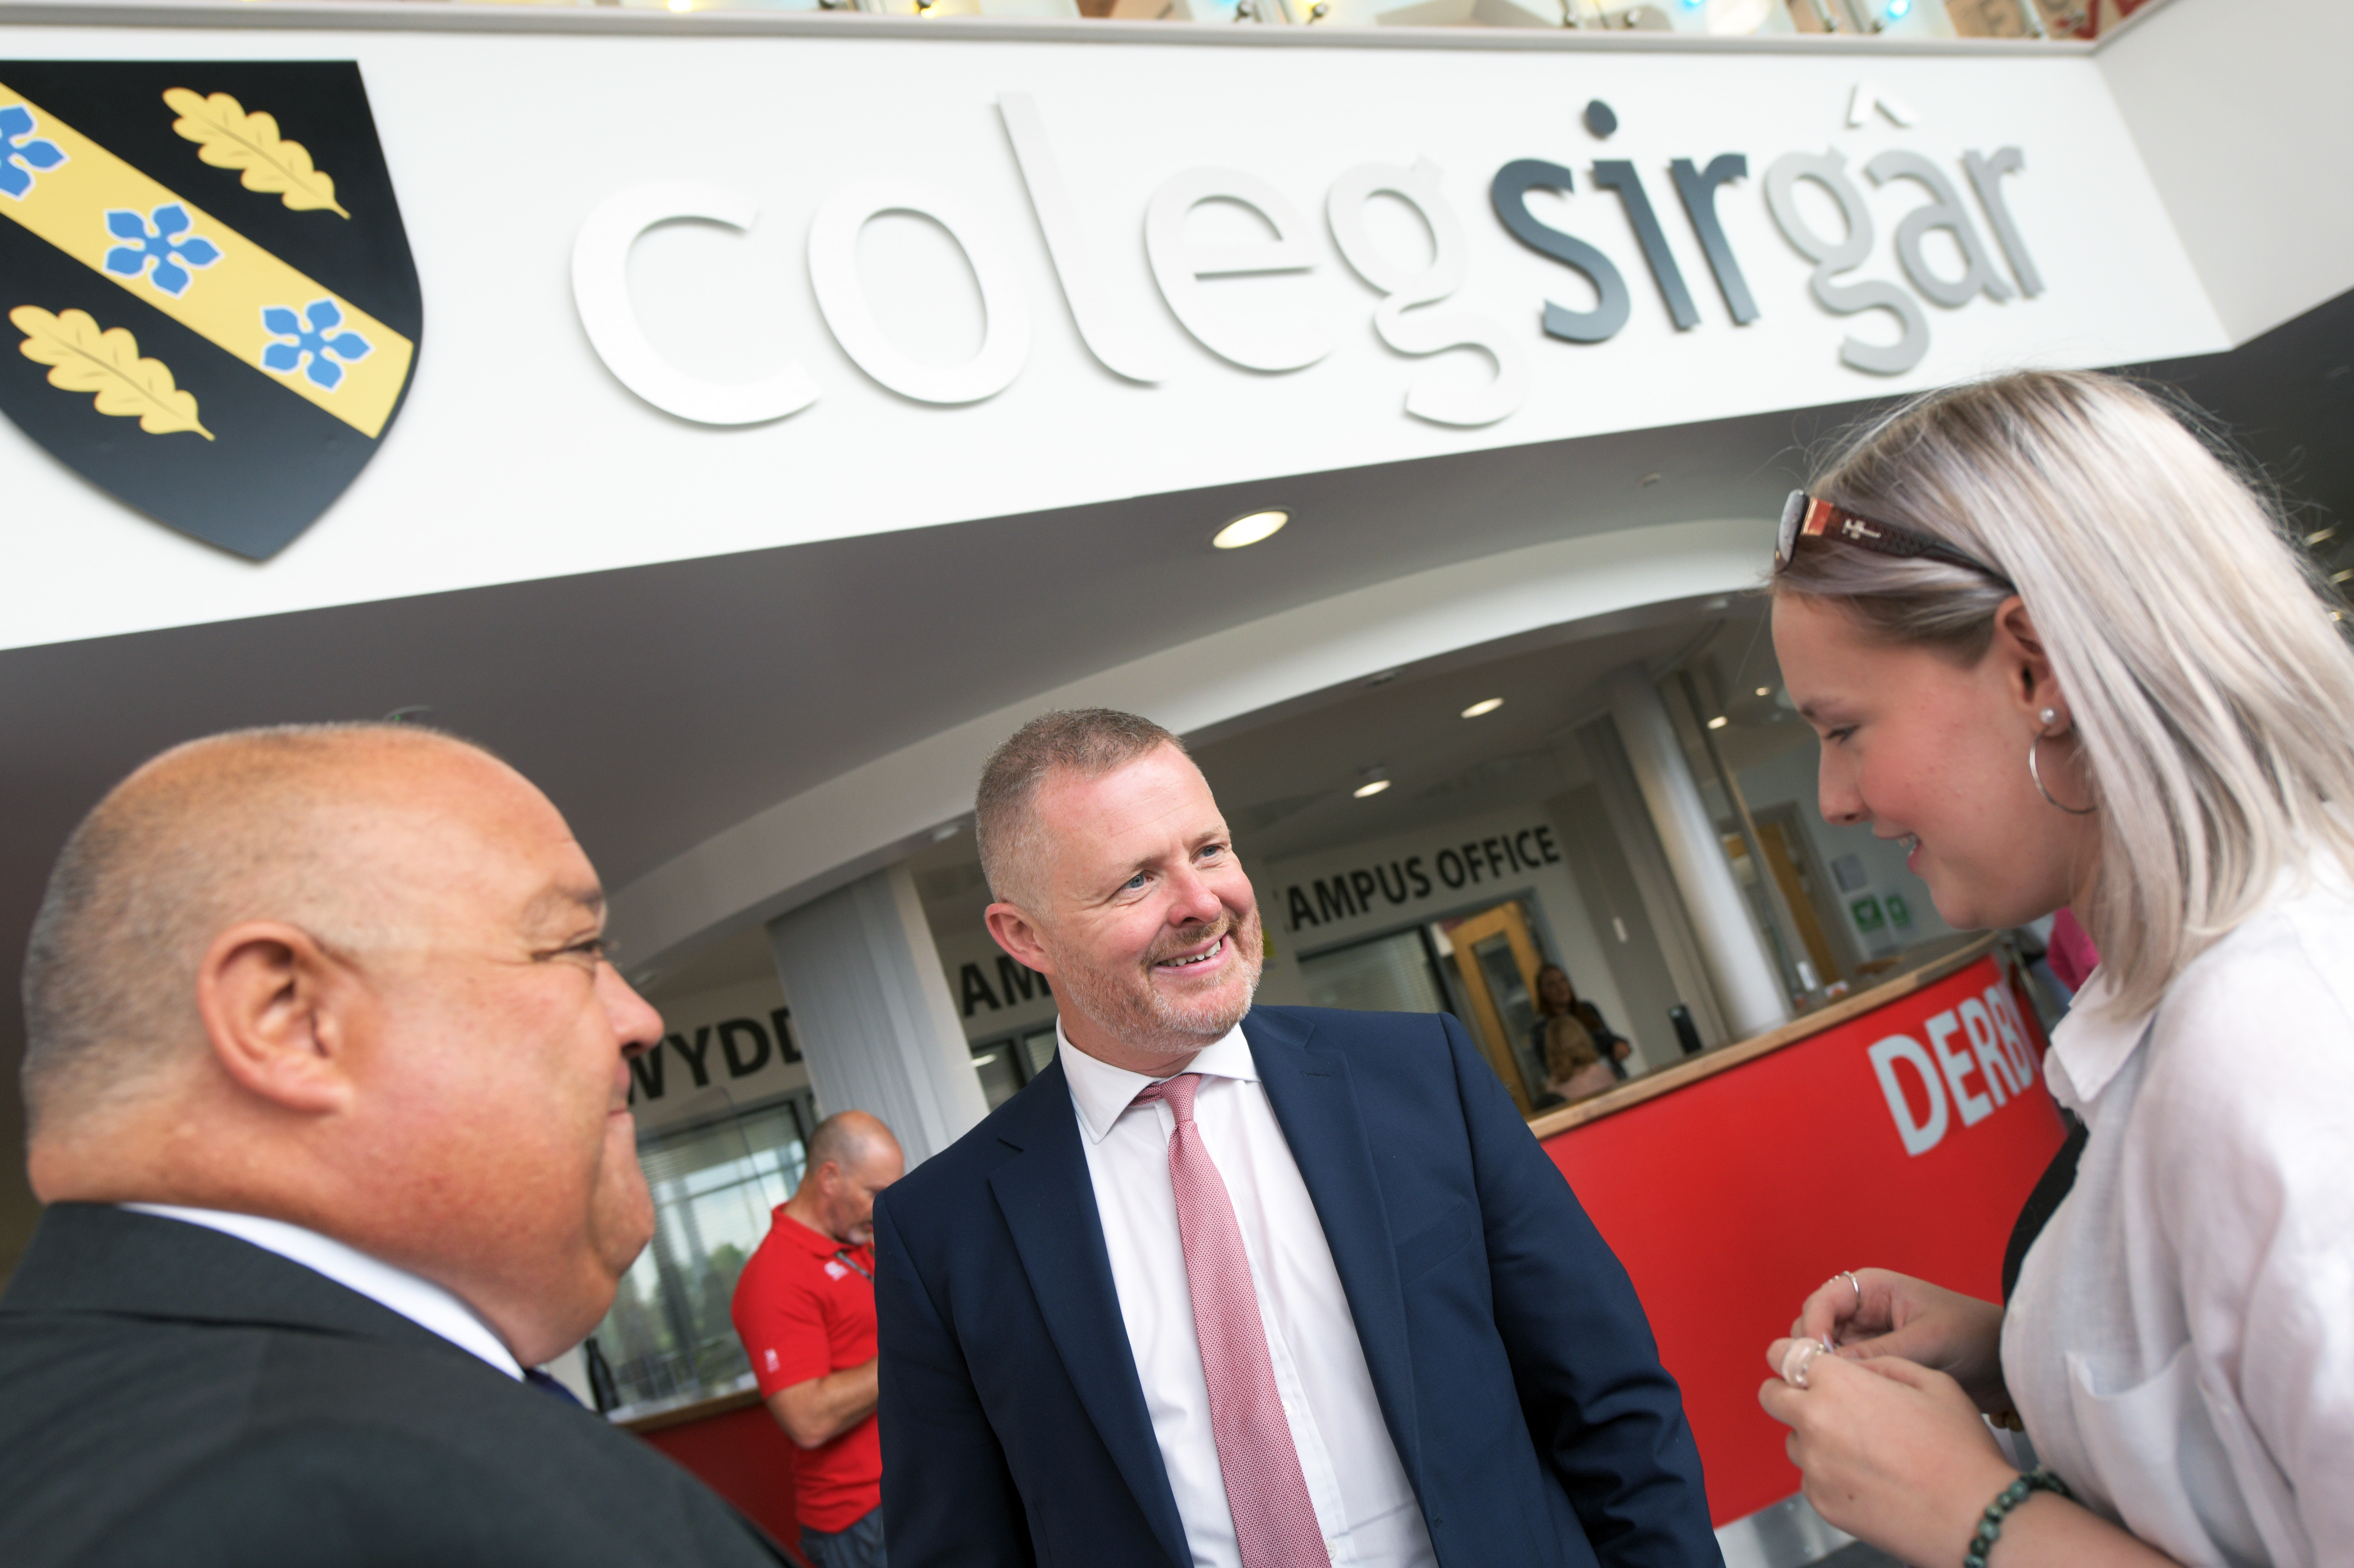 Education minister Jeremy Miles at Coleg Sir Gar in Llanelli, South Wales on A-level results day. (Terry Morris/Welsh Government)